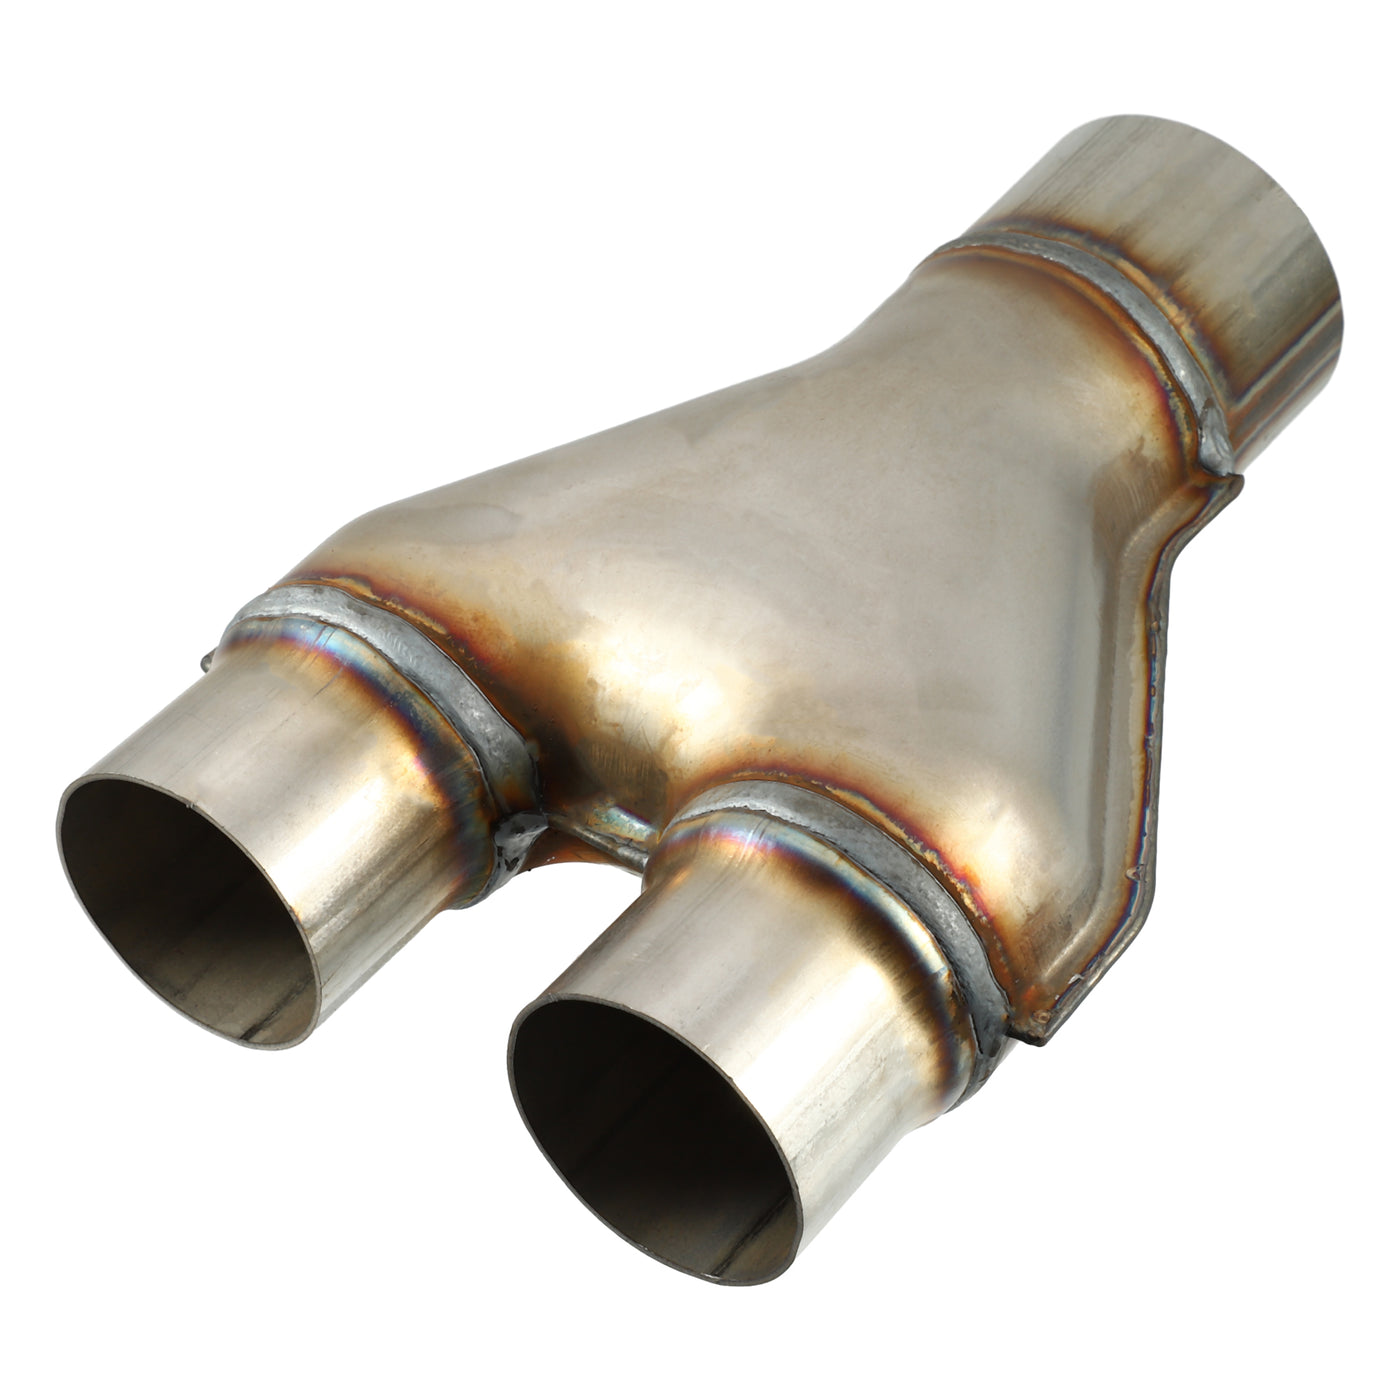 A ABSOPRO Y Pipe Exhaust Tube Adapter Connector Durable 2.75" ID Single to 2.25" ID Dual Exhaust Adapter Connector 10 Inch Overall Length T409 Stainless Steel Silver Tone